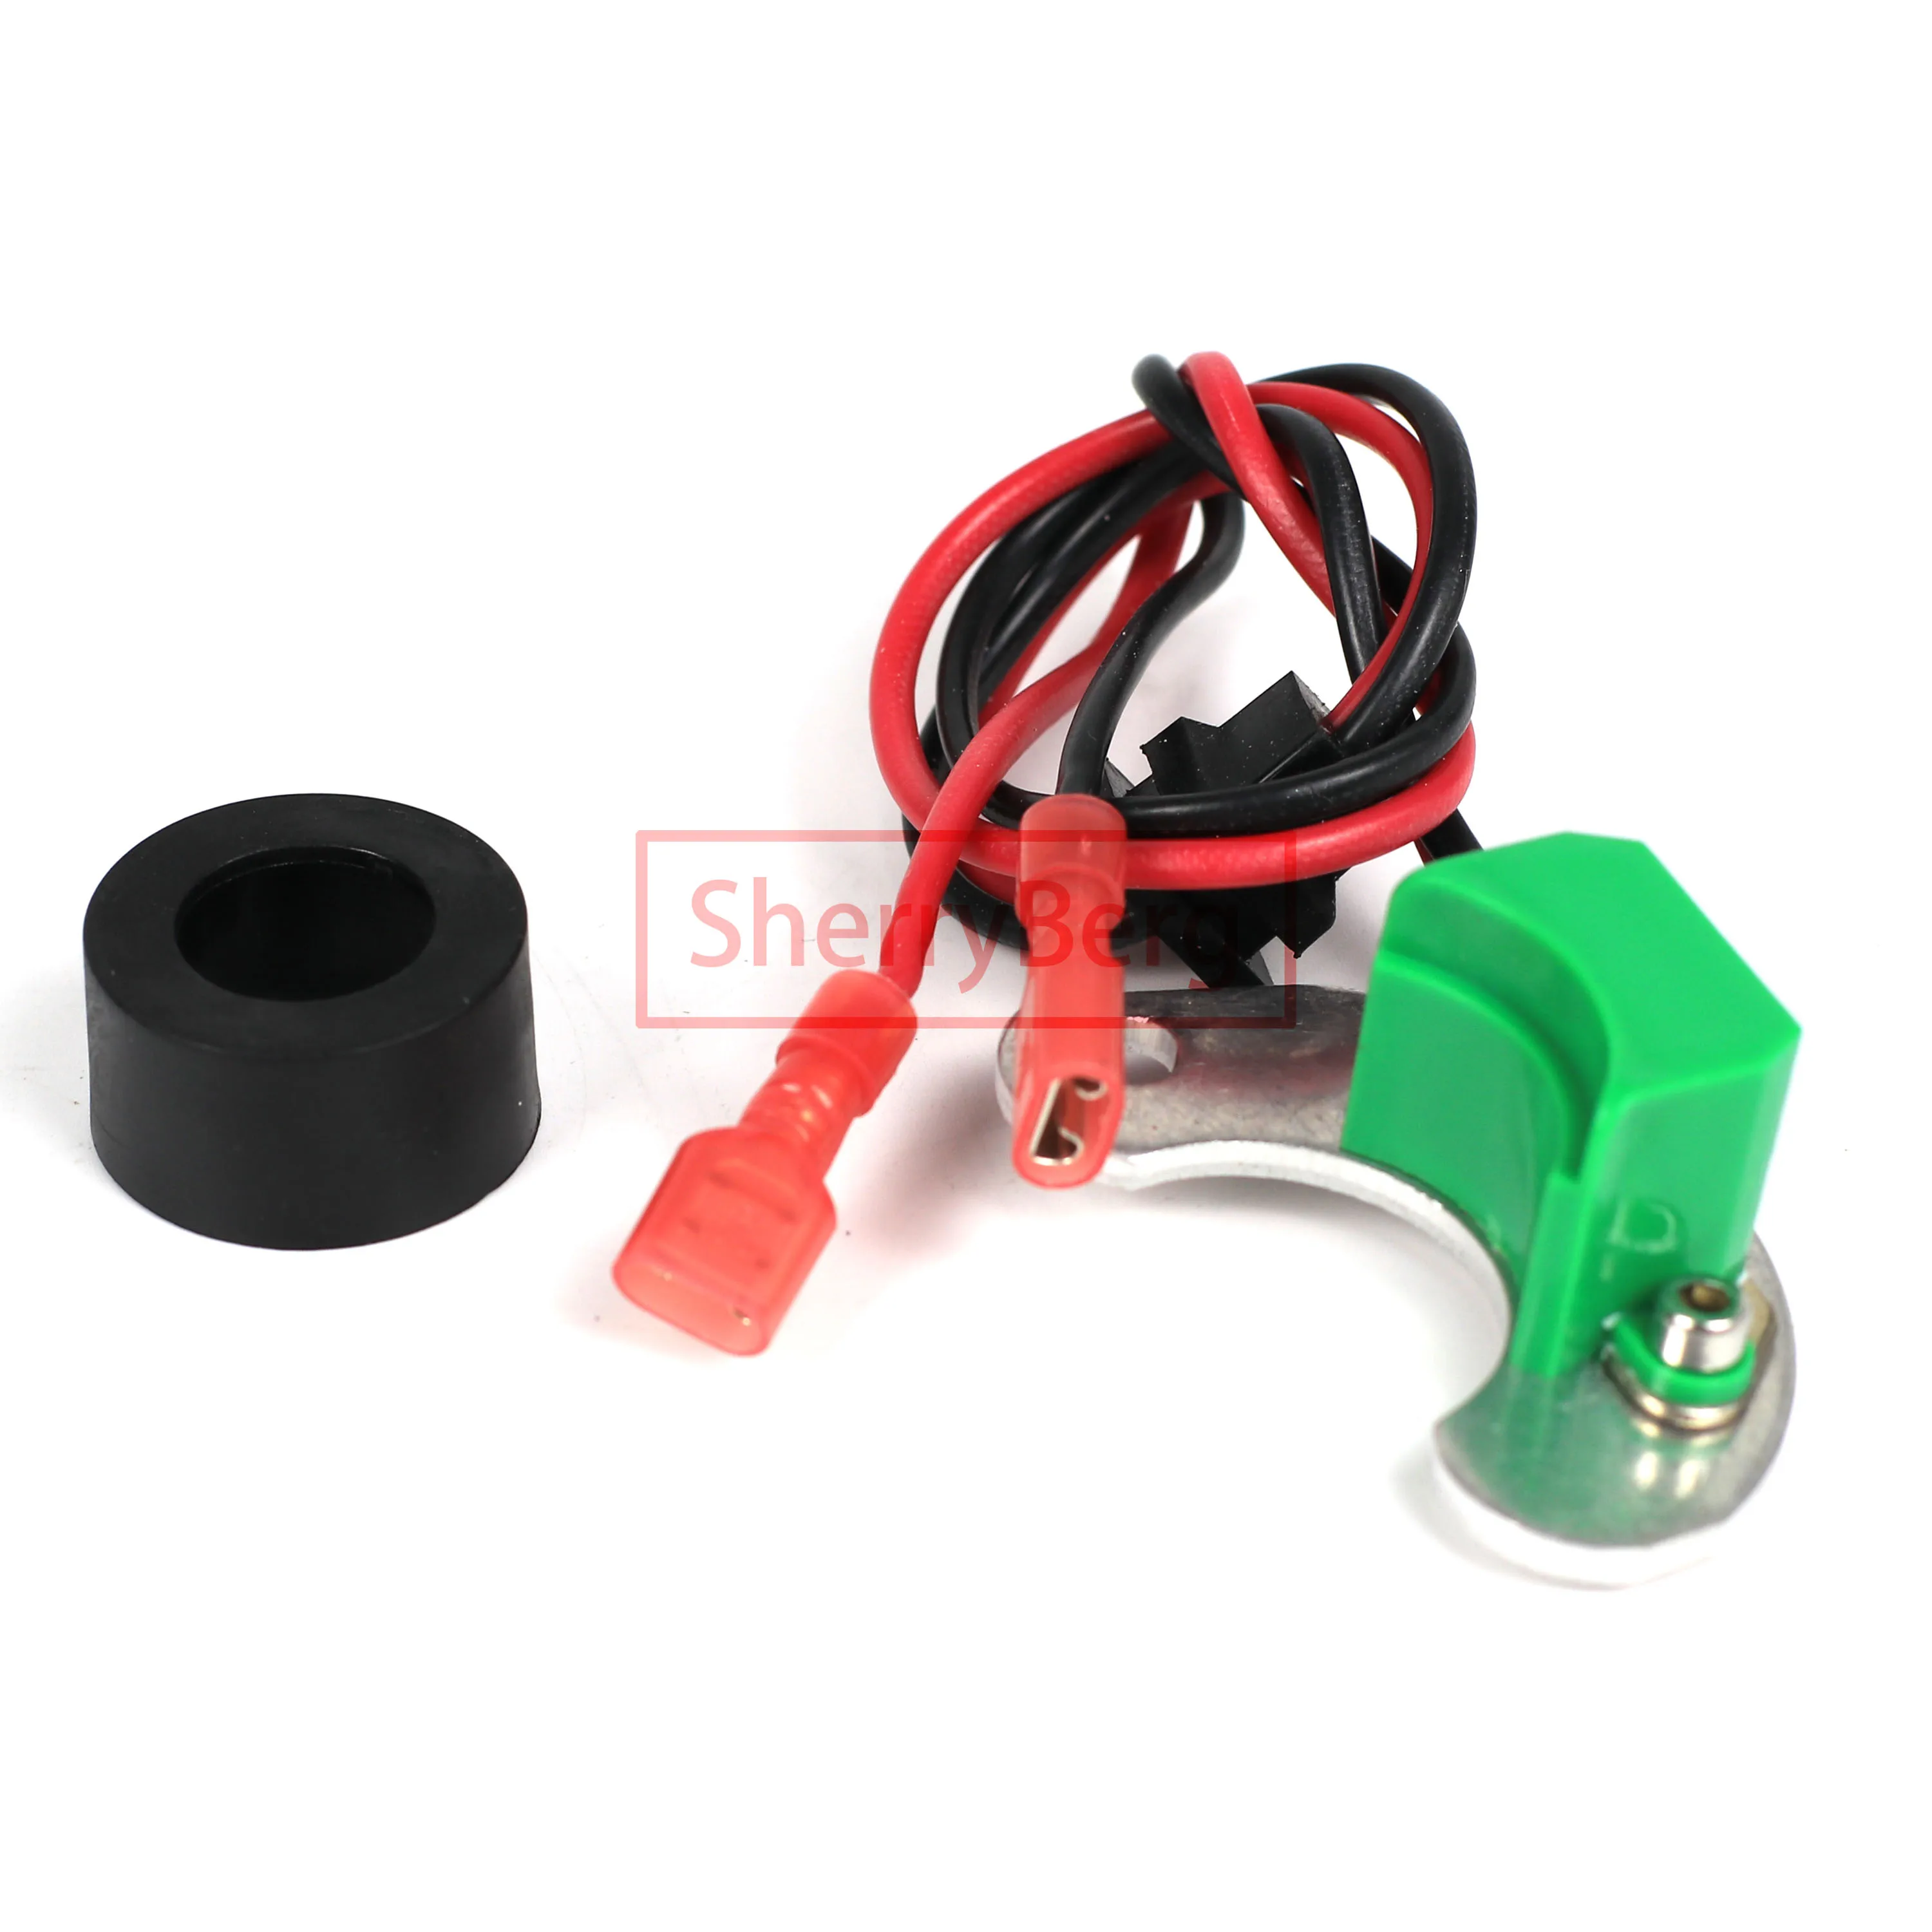 

SherryBerg Electrical IGNITION KIT fit for Bosch 005 & 009 - Distributor Electronic Ignition Conversion Kit - Complete New